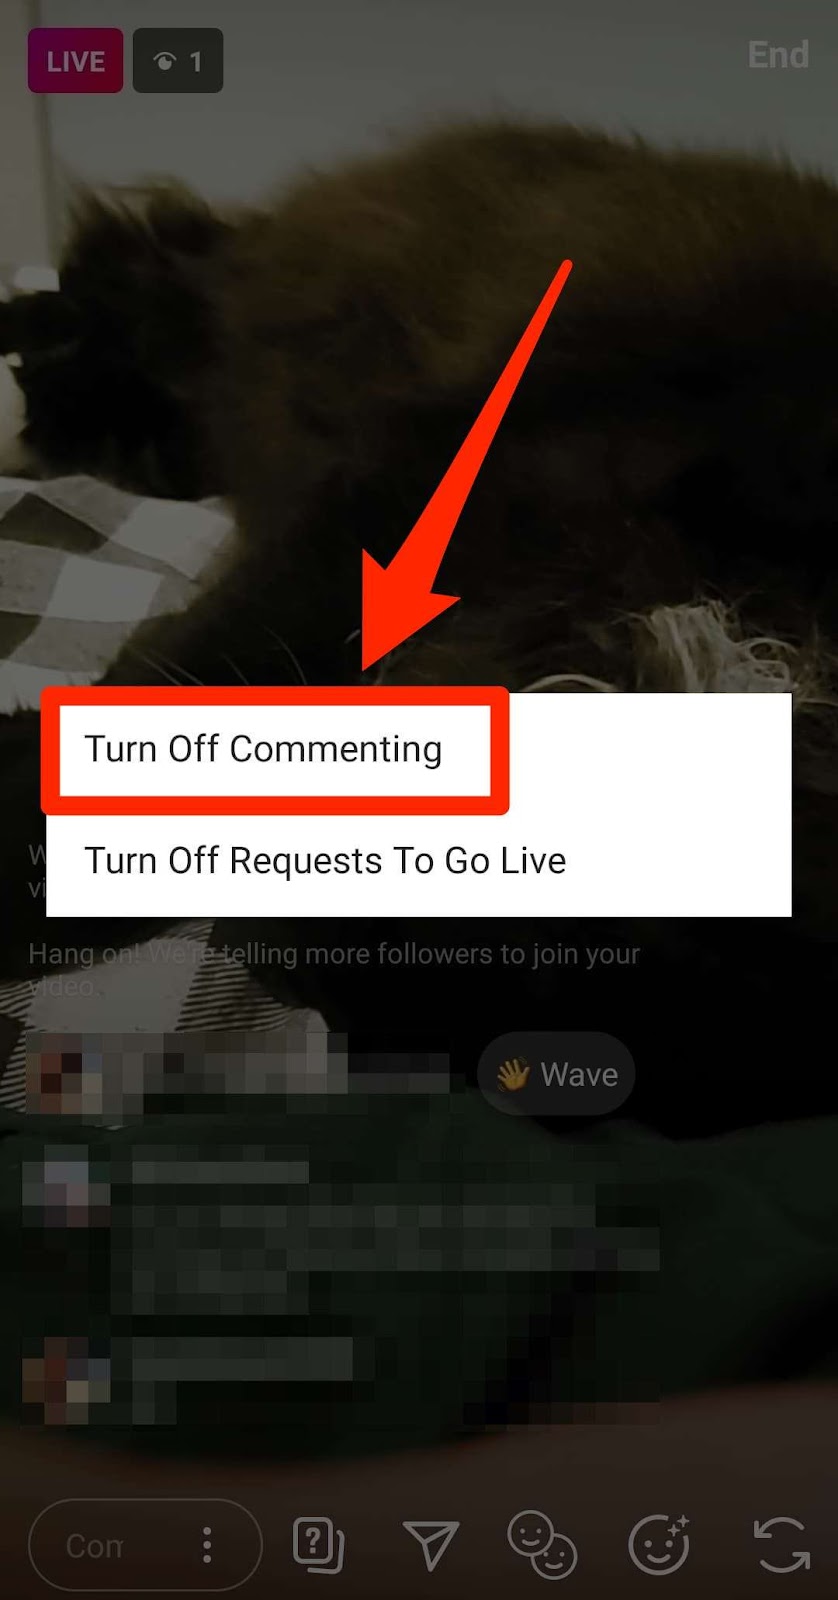 How to hide comments on Instagram Live in 5 simple steps | Business Insider India